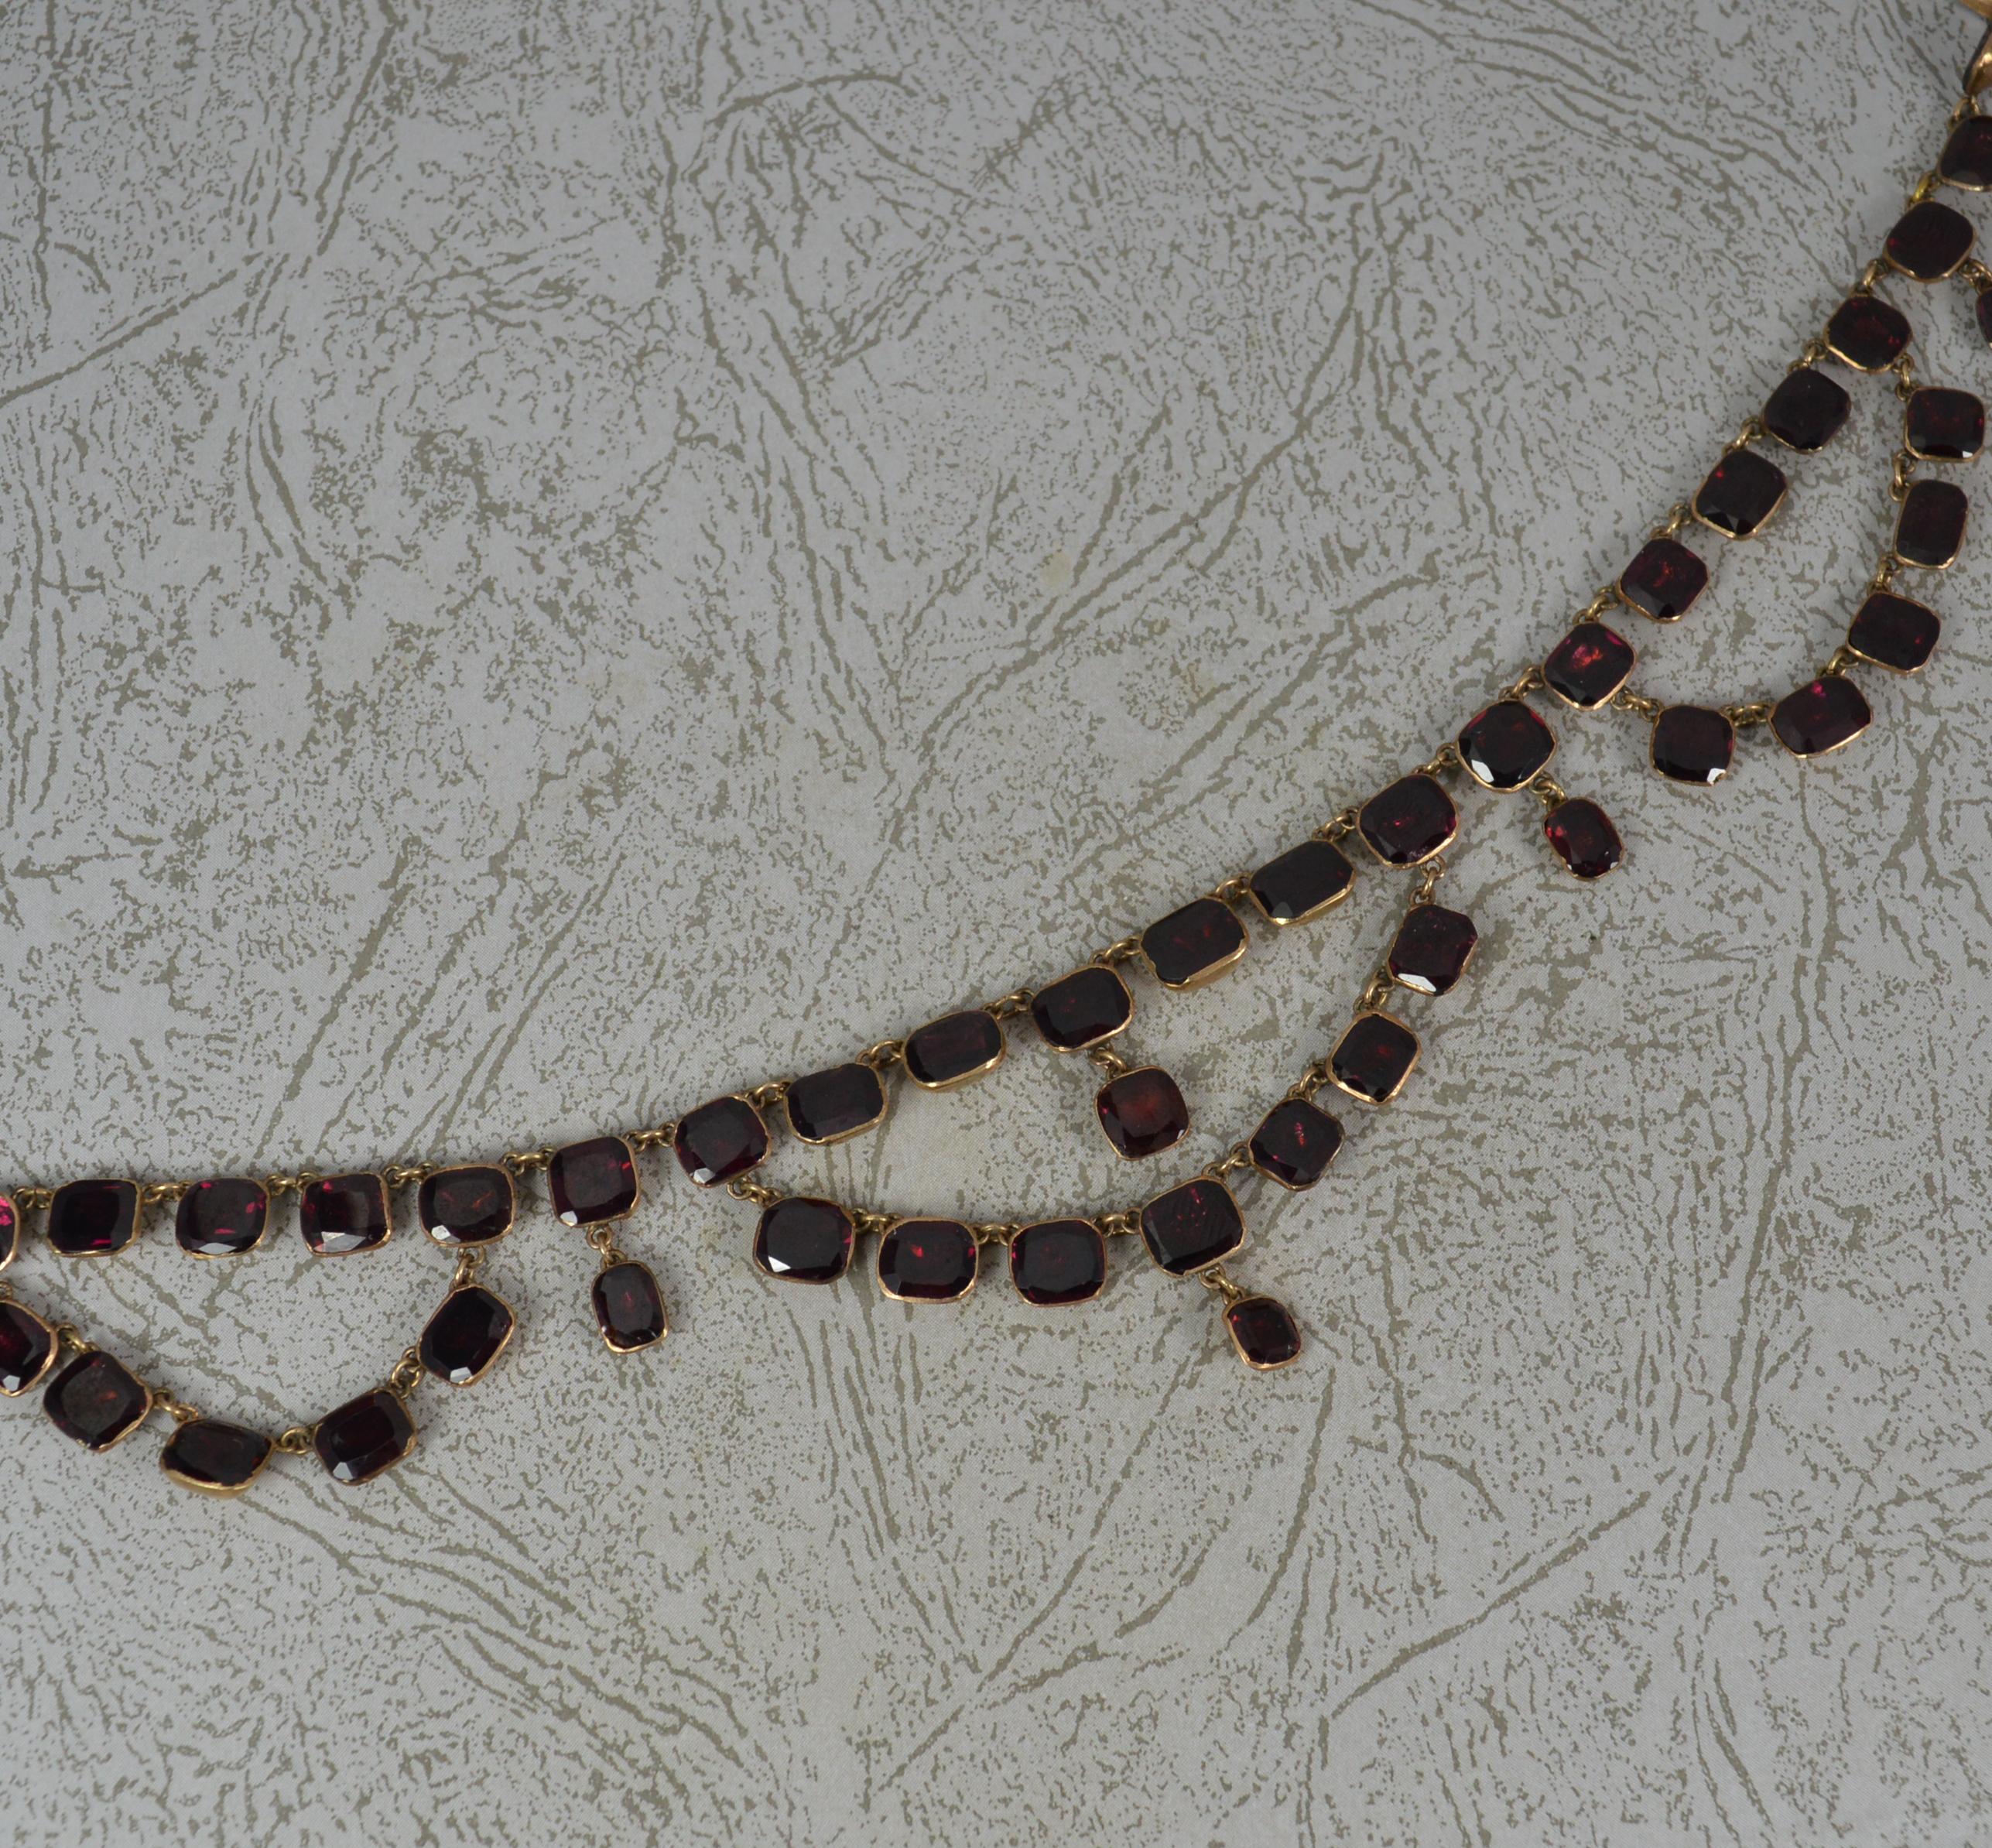 A fine quality riviere necklace.
Solid 15 carat rose gold example.
Superb example, circa 1820-1840. 
Set with 66 natural cushion shaped garnets, set into foiled, closed back settings. A triple drop dangle design.


CONDITION ; Excellent for age.